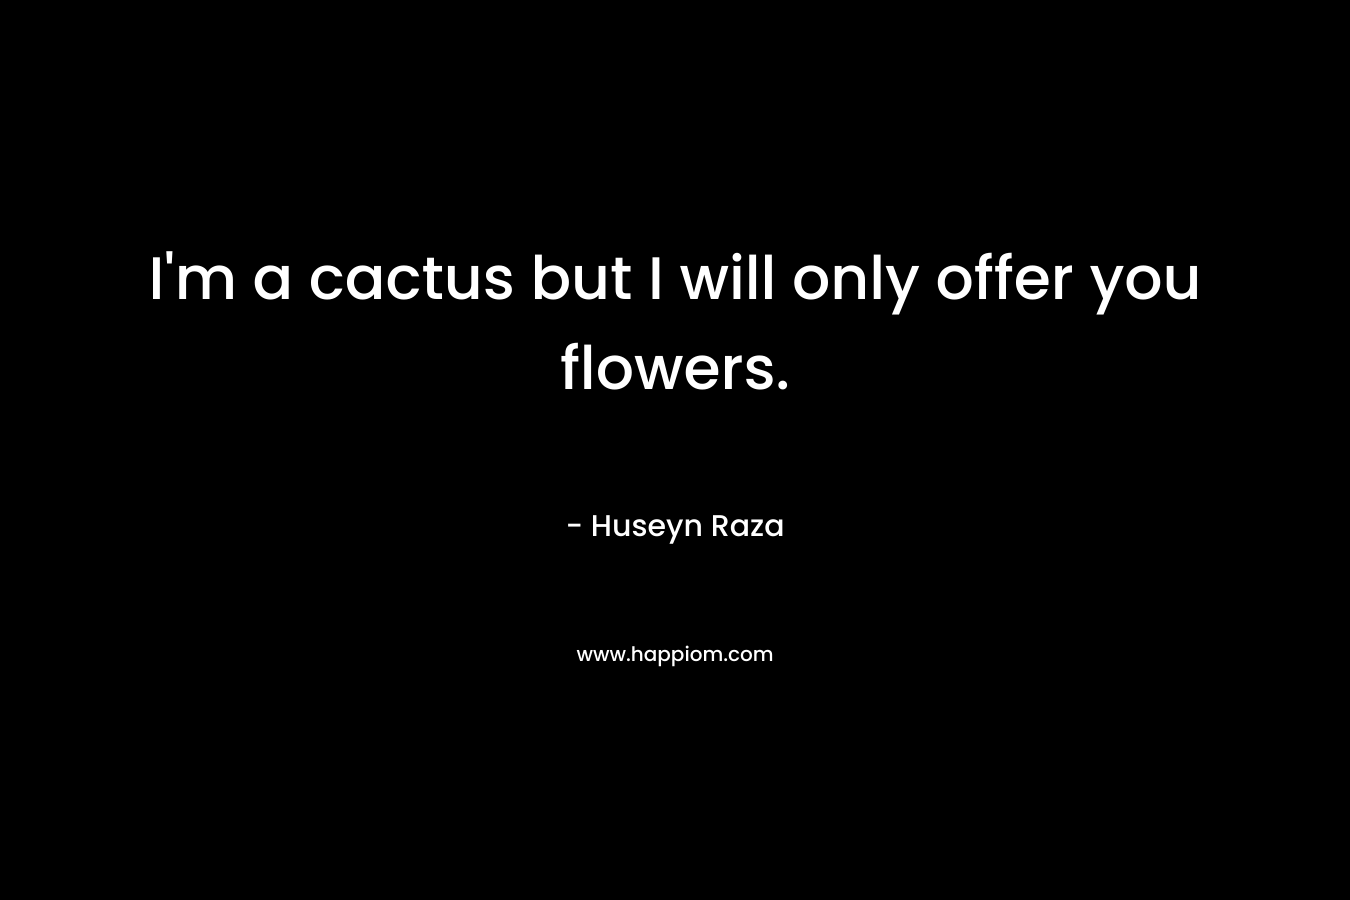 I'm a cactus but I will only offer you flowers.